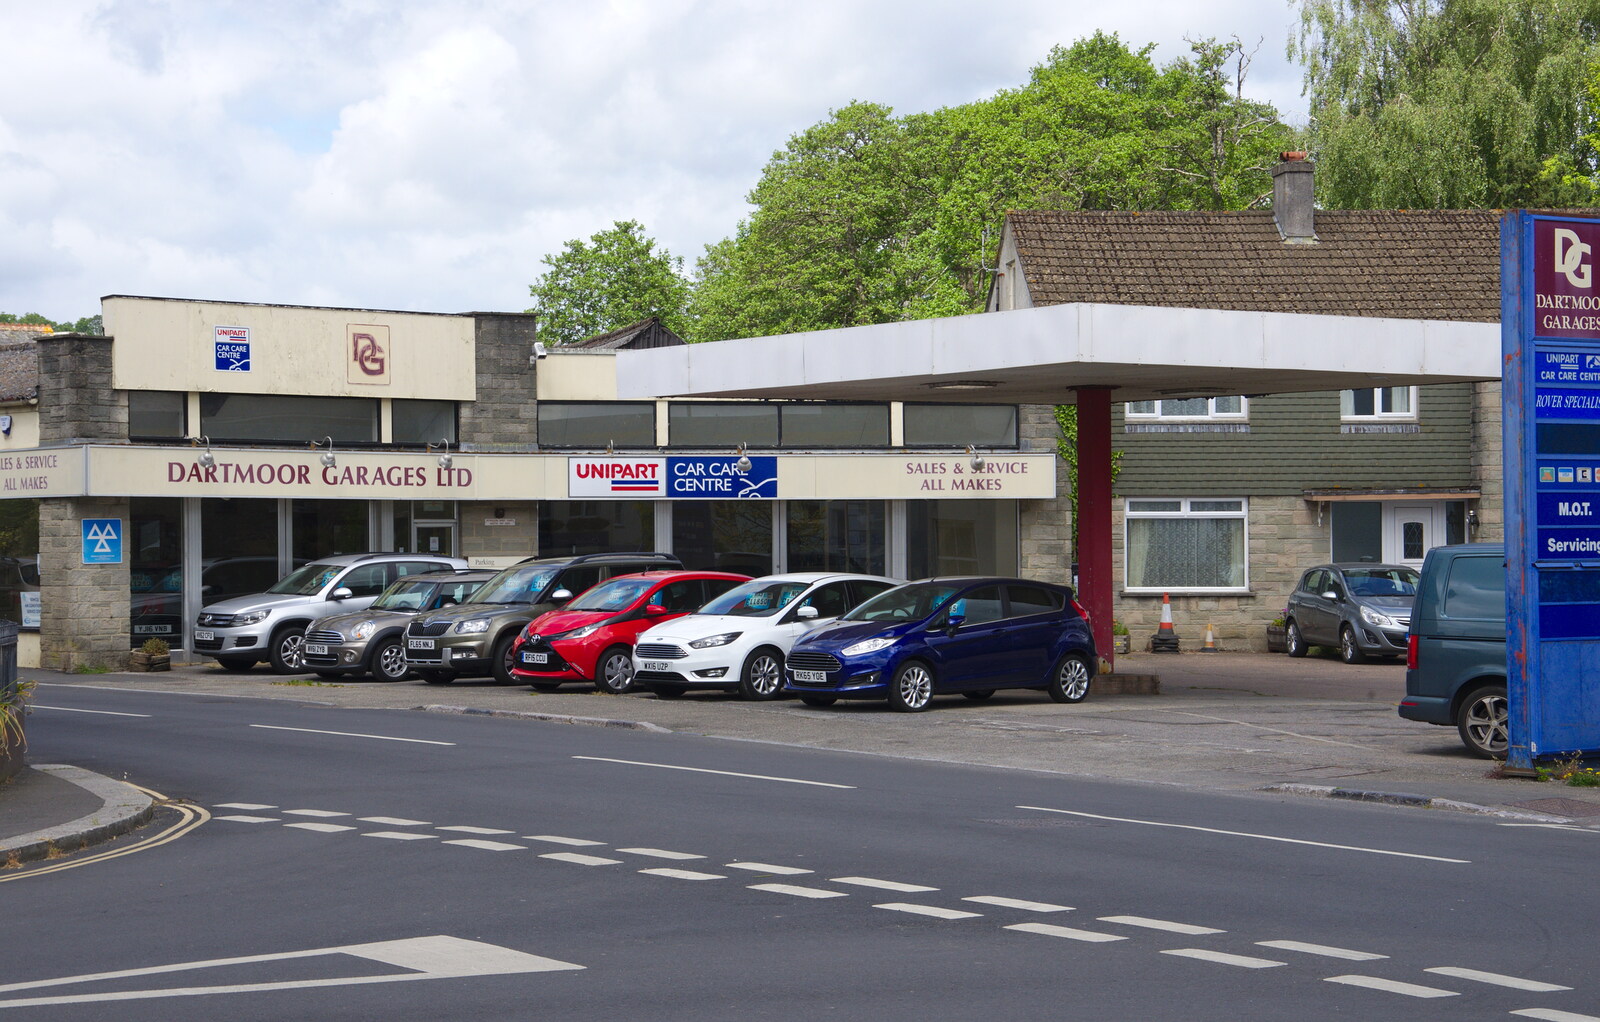 An old garage now just sells cars from The Tom Cobley and a Return to Haytor, Bovey Tracey, Devon - 27th May 2019